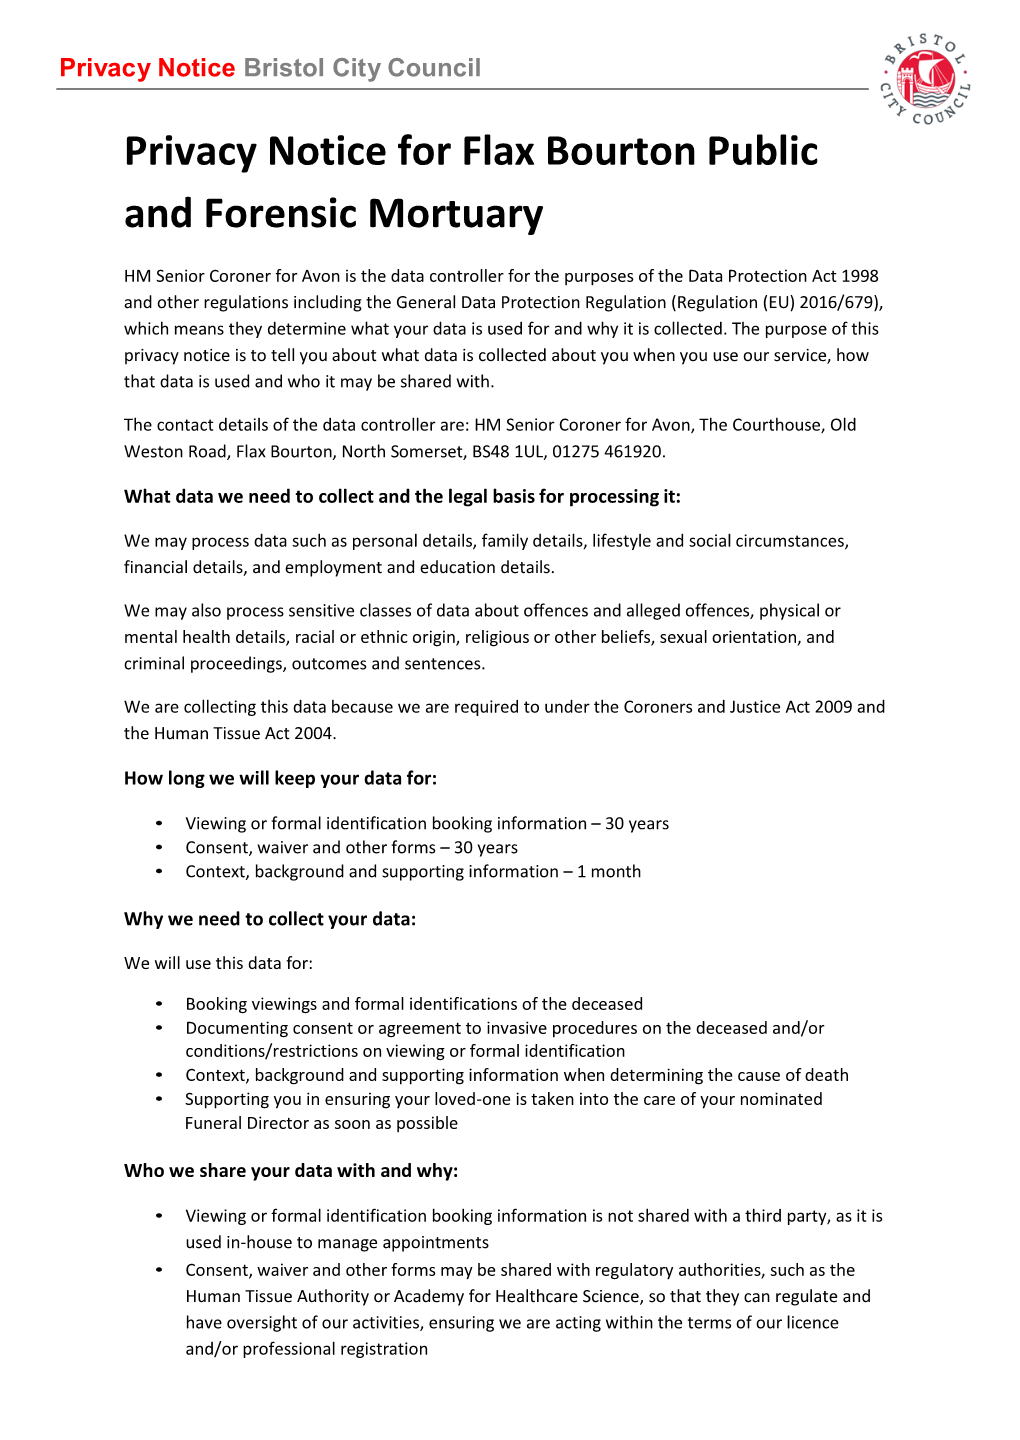 Privacy Notice for Flax Bourton Public and Forensic Mortuary